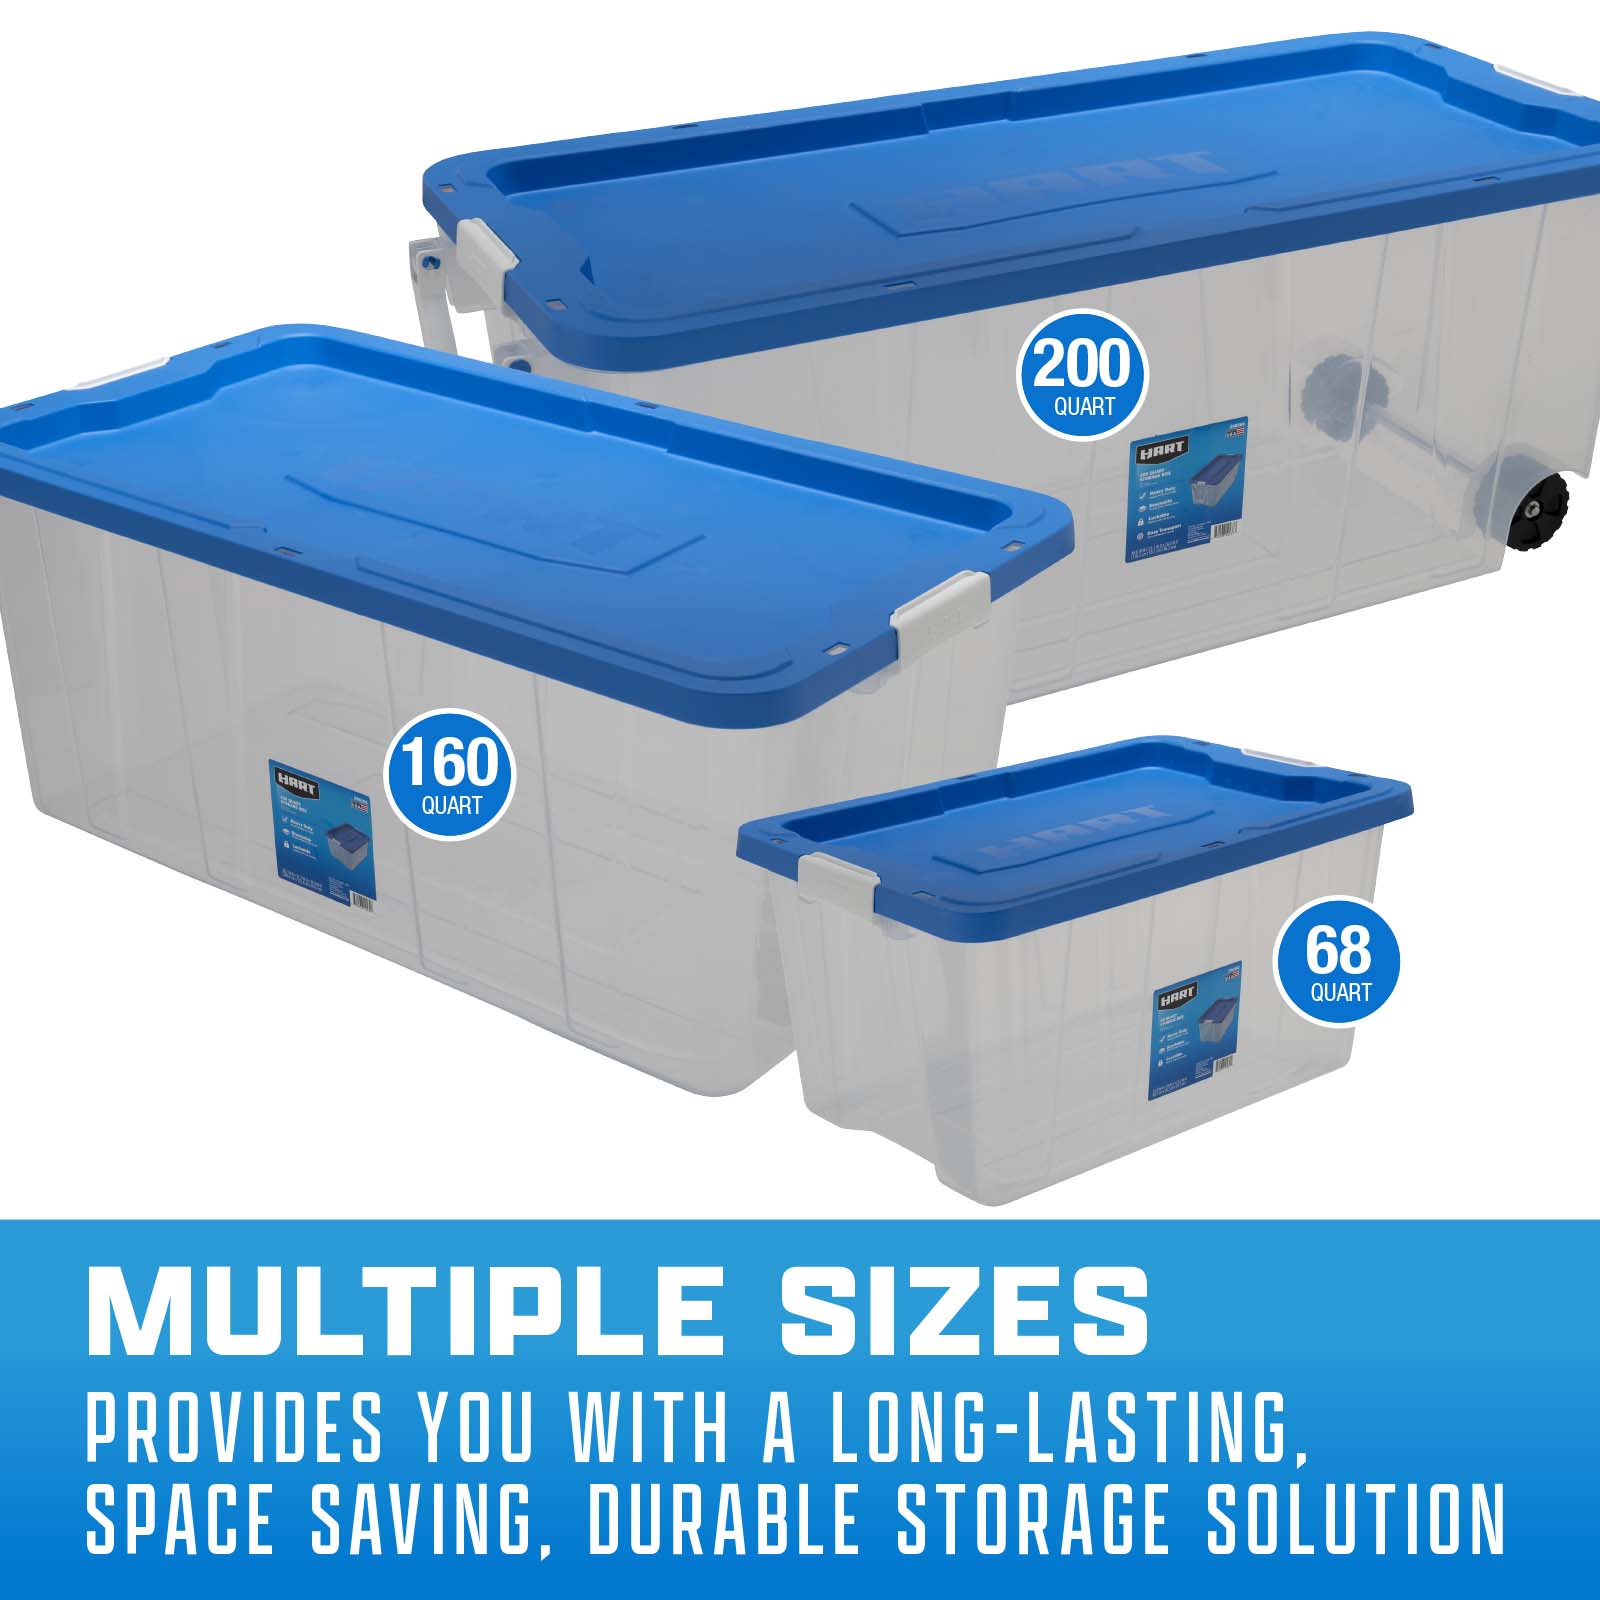 Multiple sizes provides you with a long lasting, space saving, durable storage solution